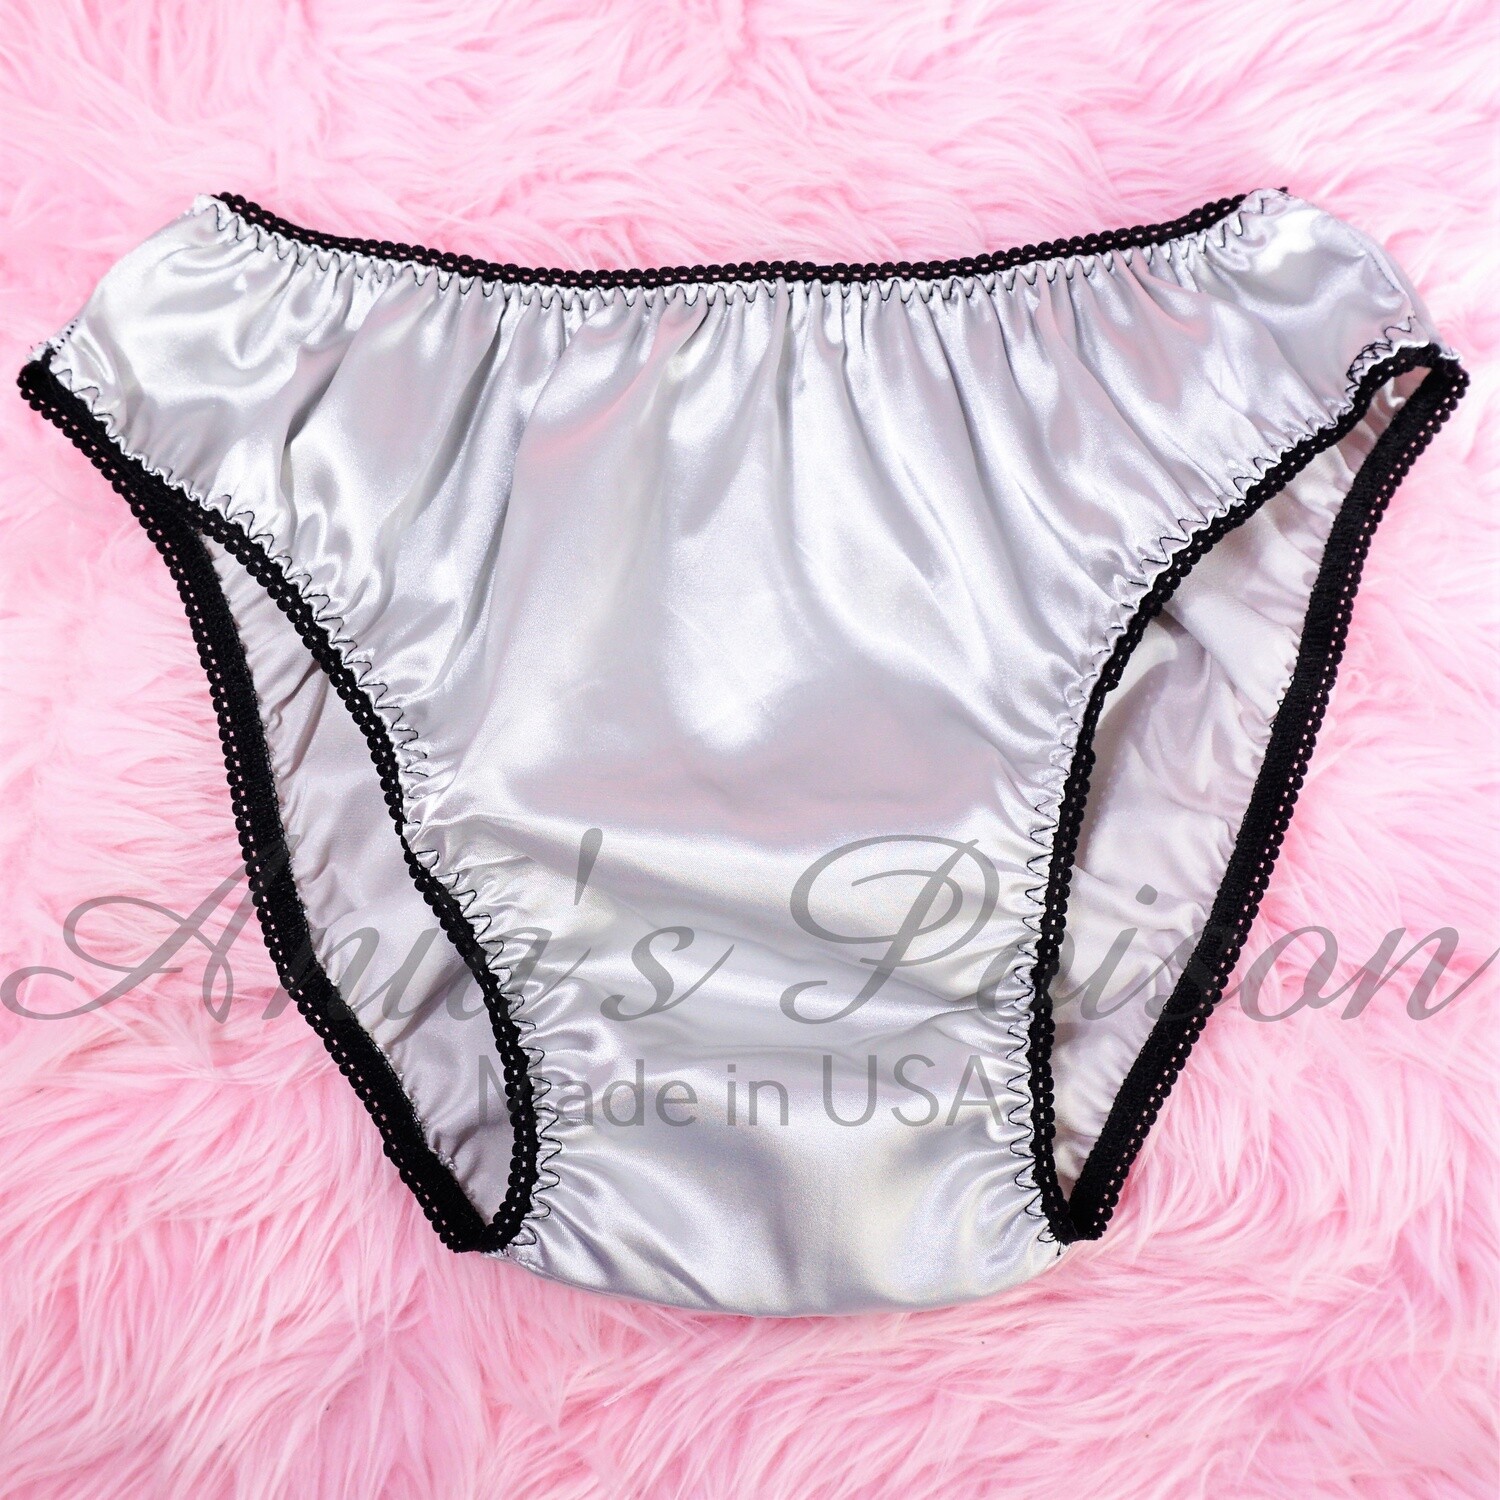 Anias Poison Full Solid color bikini cut Soft satin lined SISSY